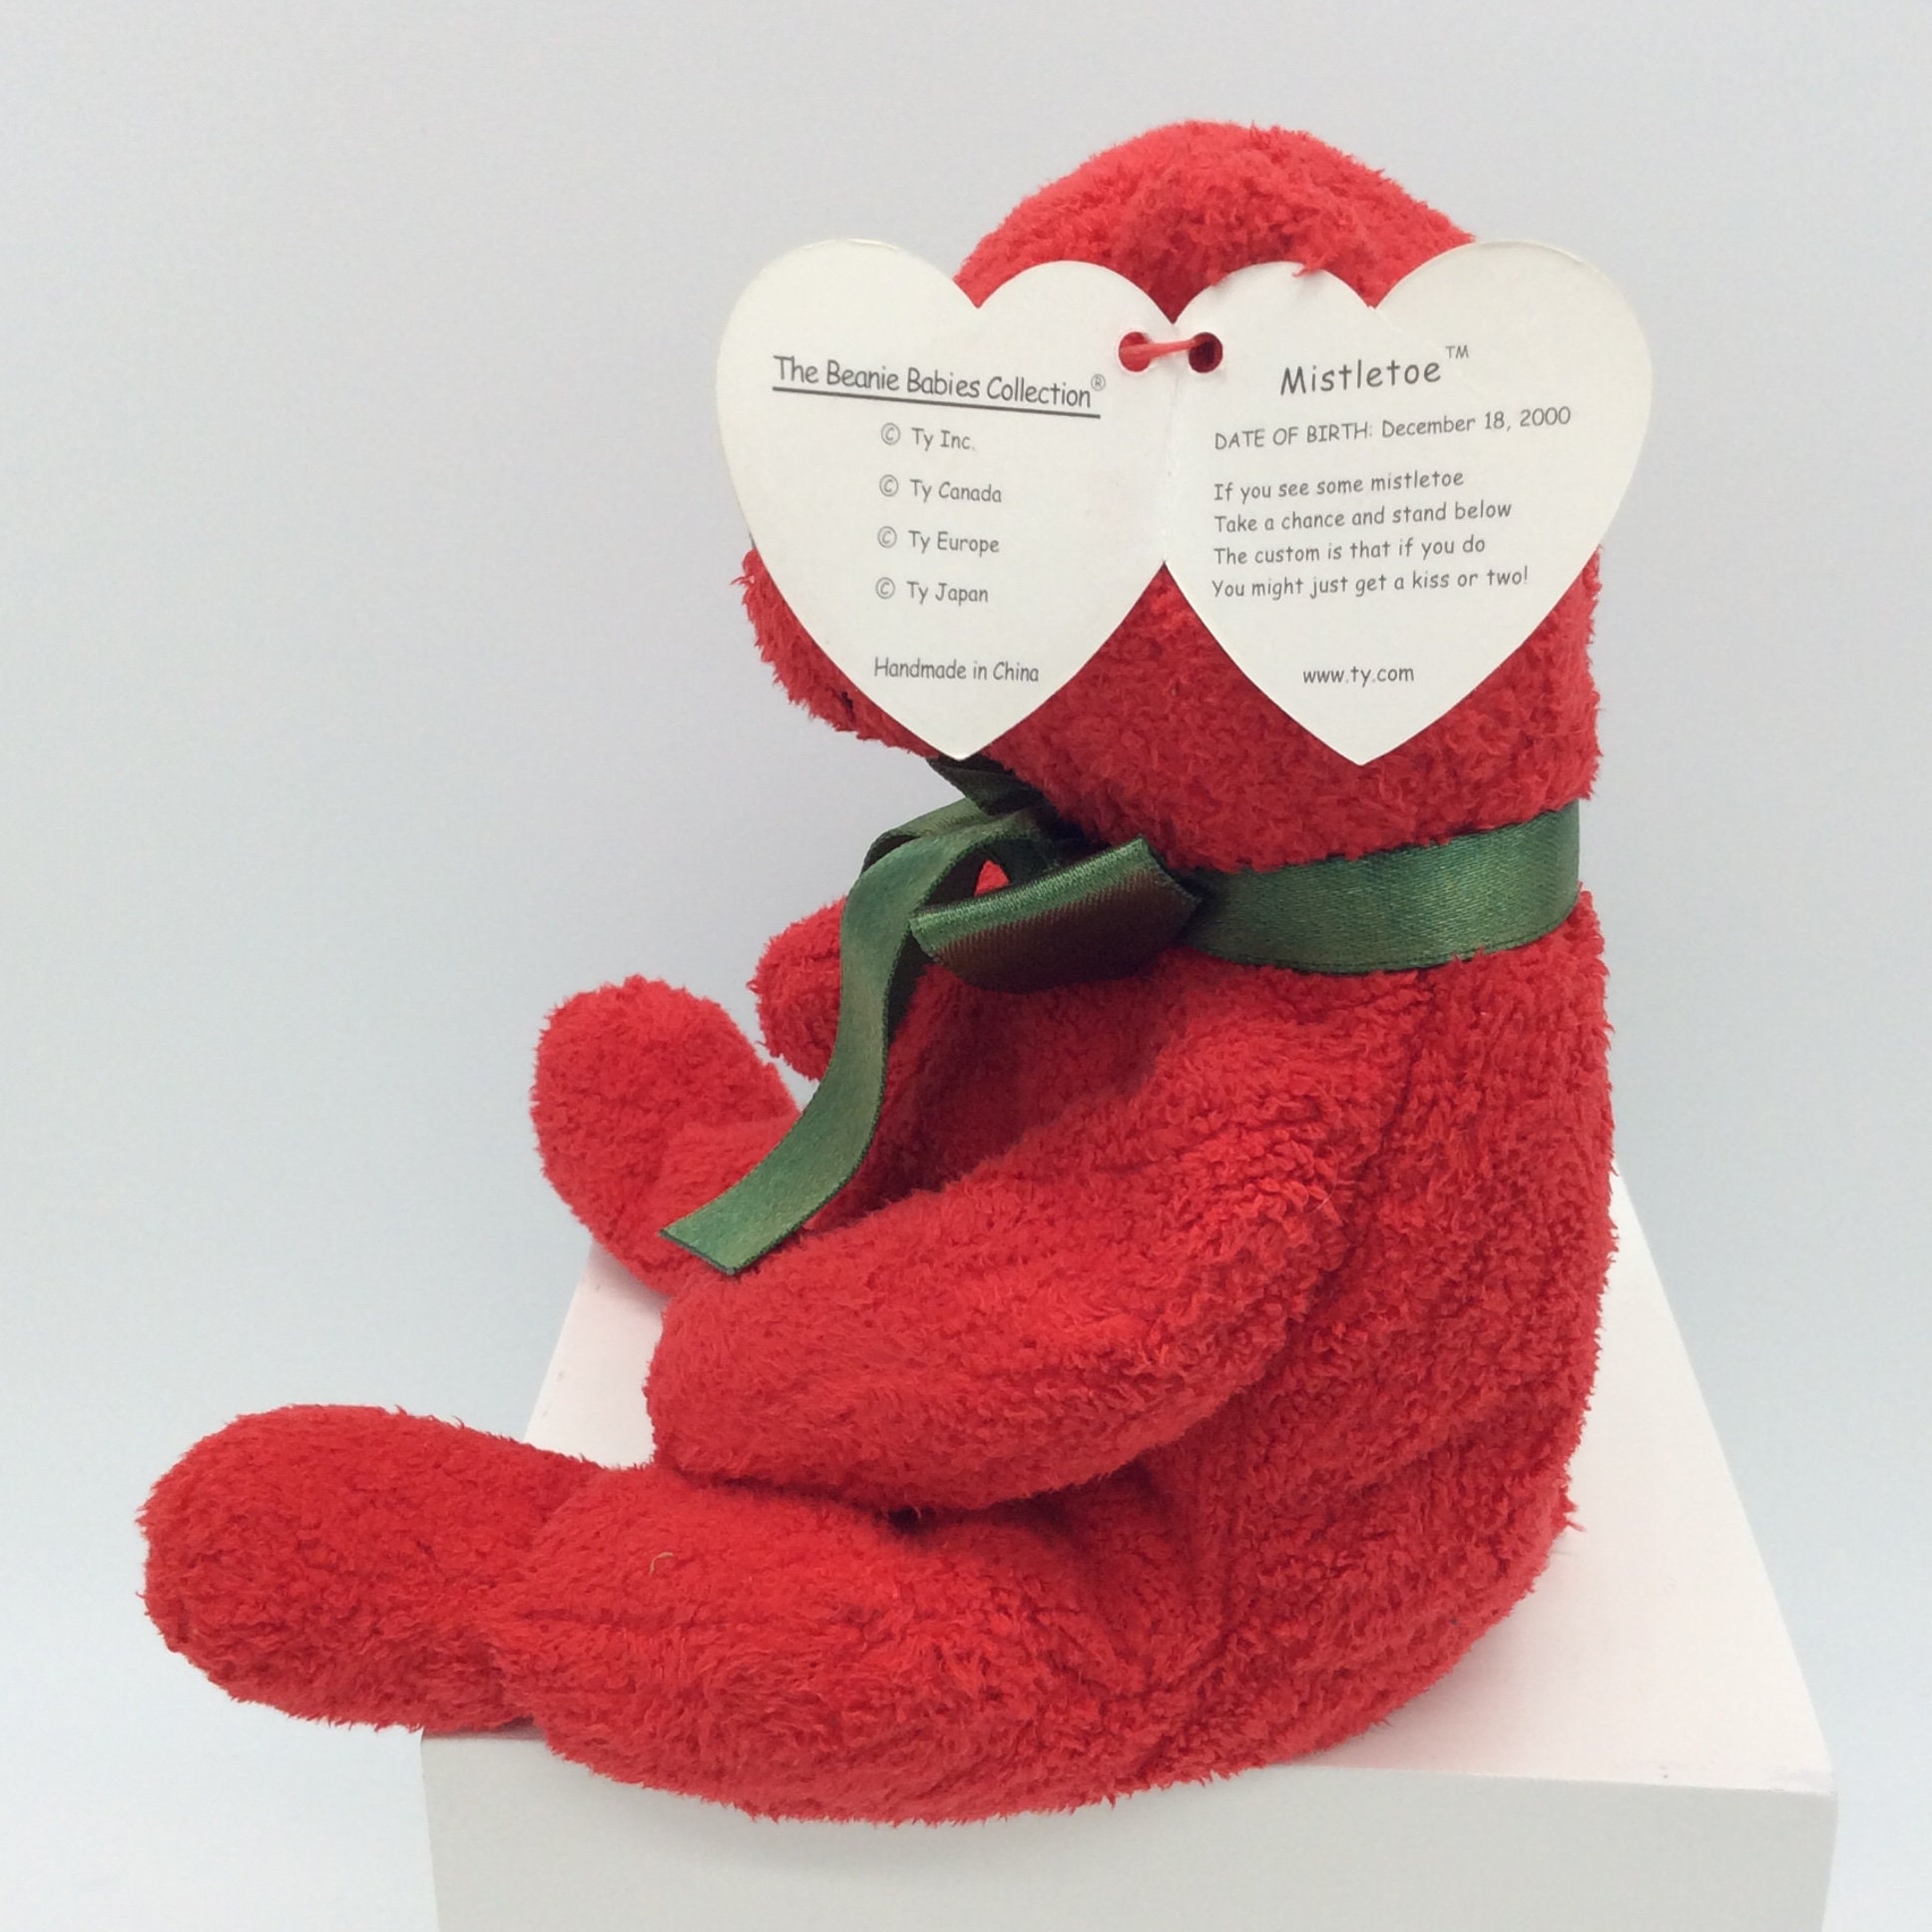 Ty Beanie Baby Mistletoe 2000 9th Generation Hang Tag for sale online 